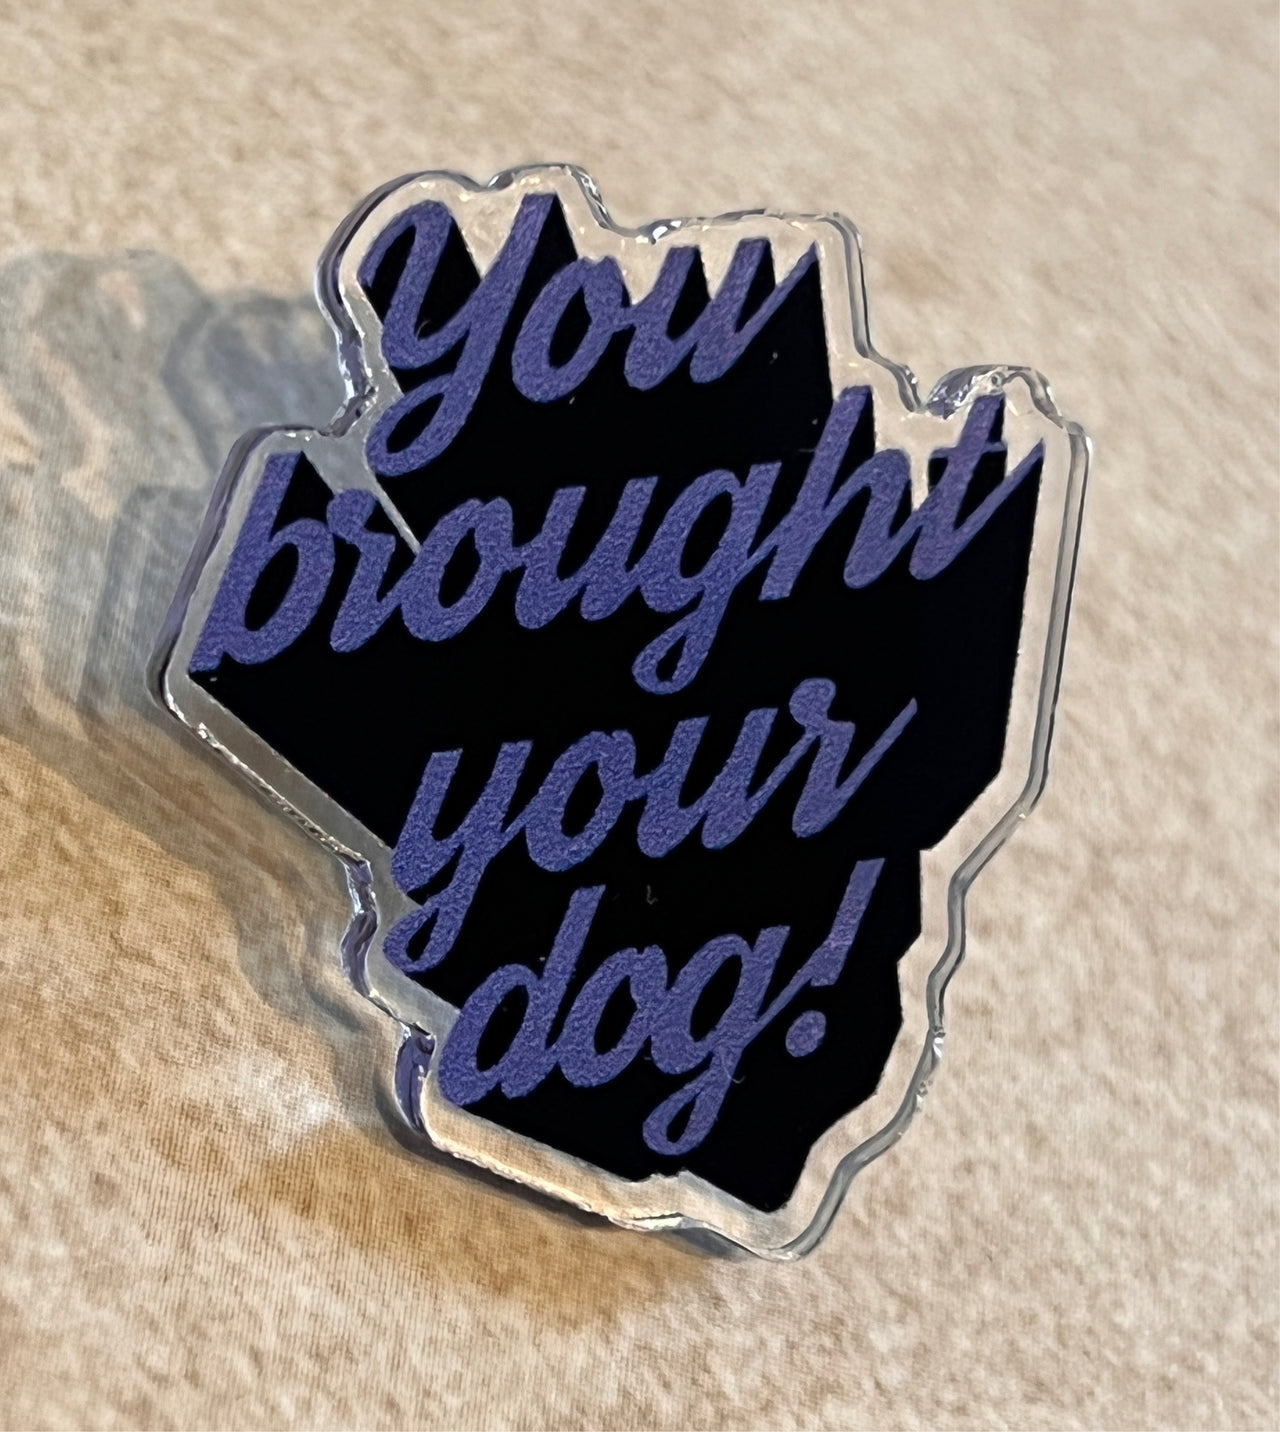 You Brought Your Dog! Acrylic Pin